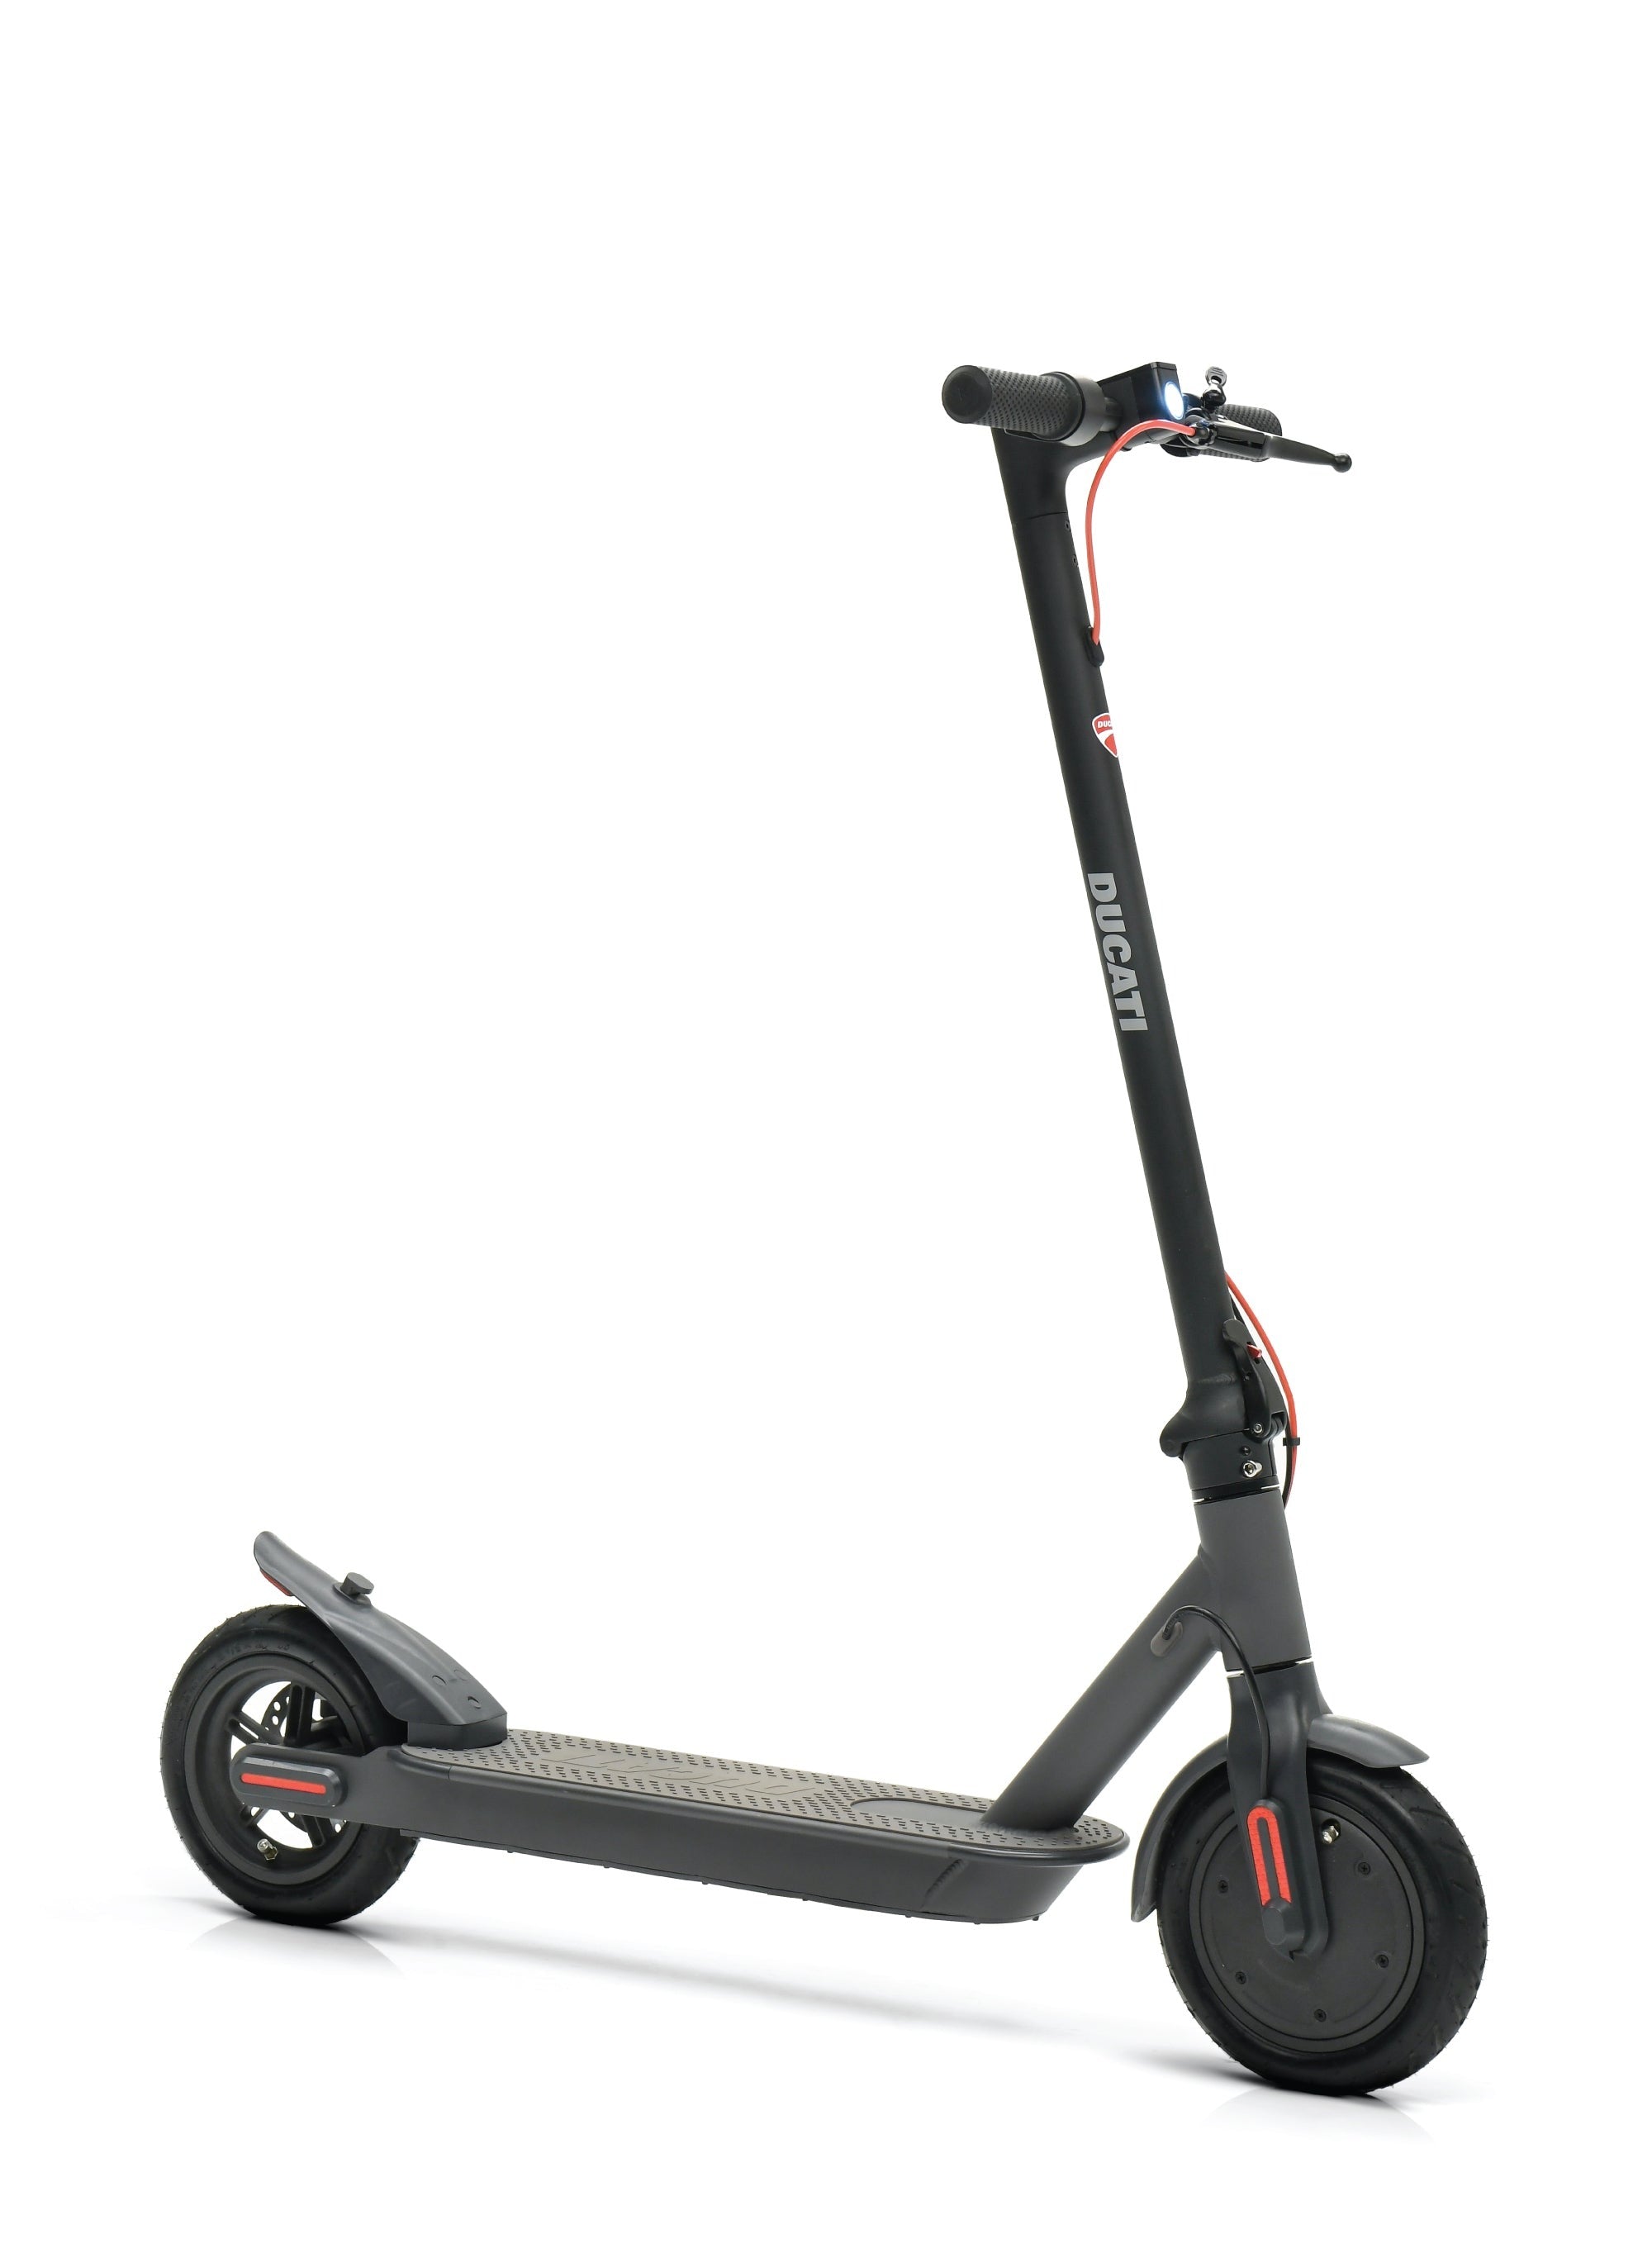 Electric Scooter UAE